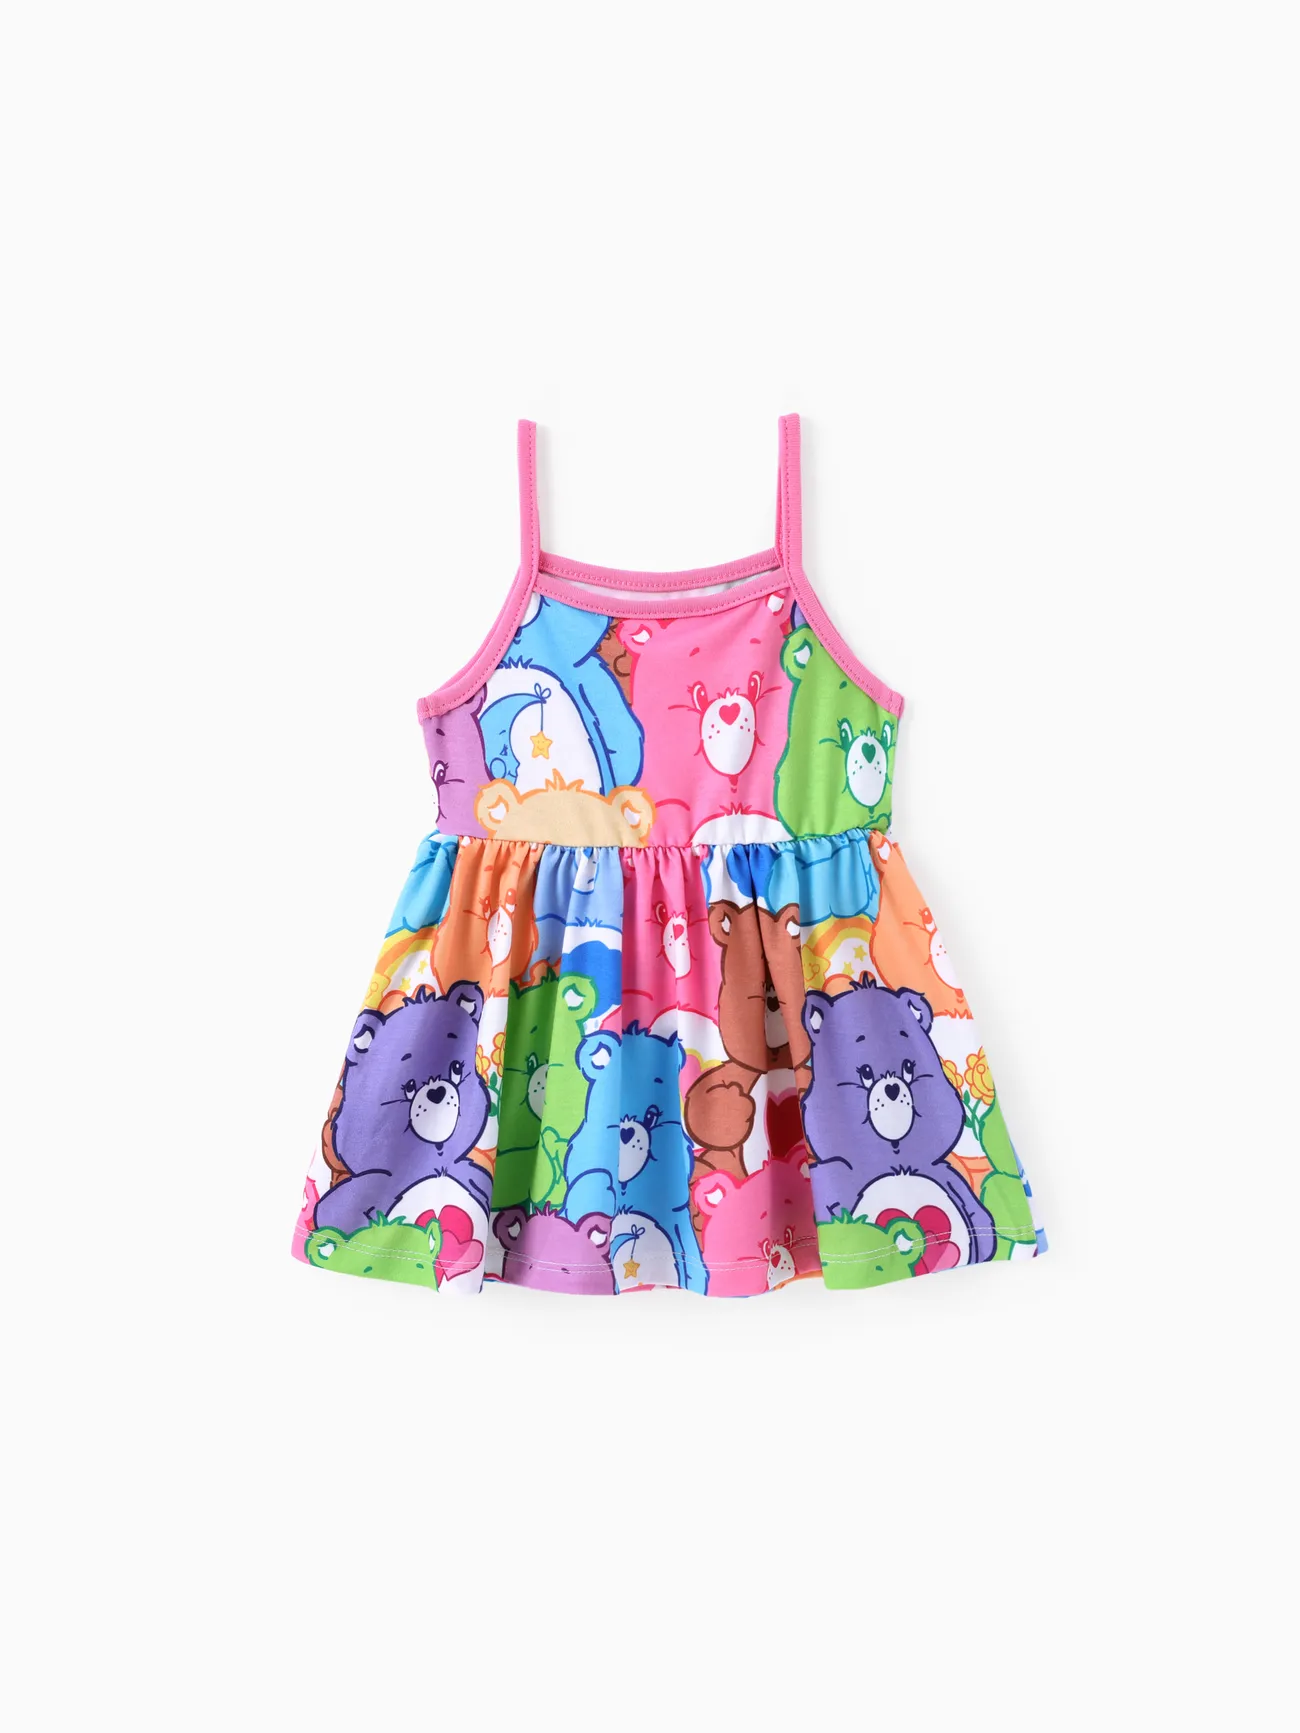 Care Bears Baby Girl Colorful Striped or Allover Print Cami Dress Multi-color big image 1